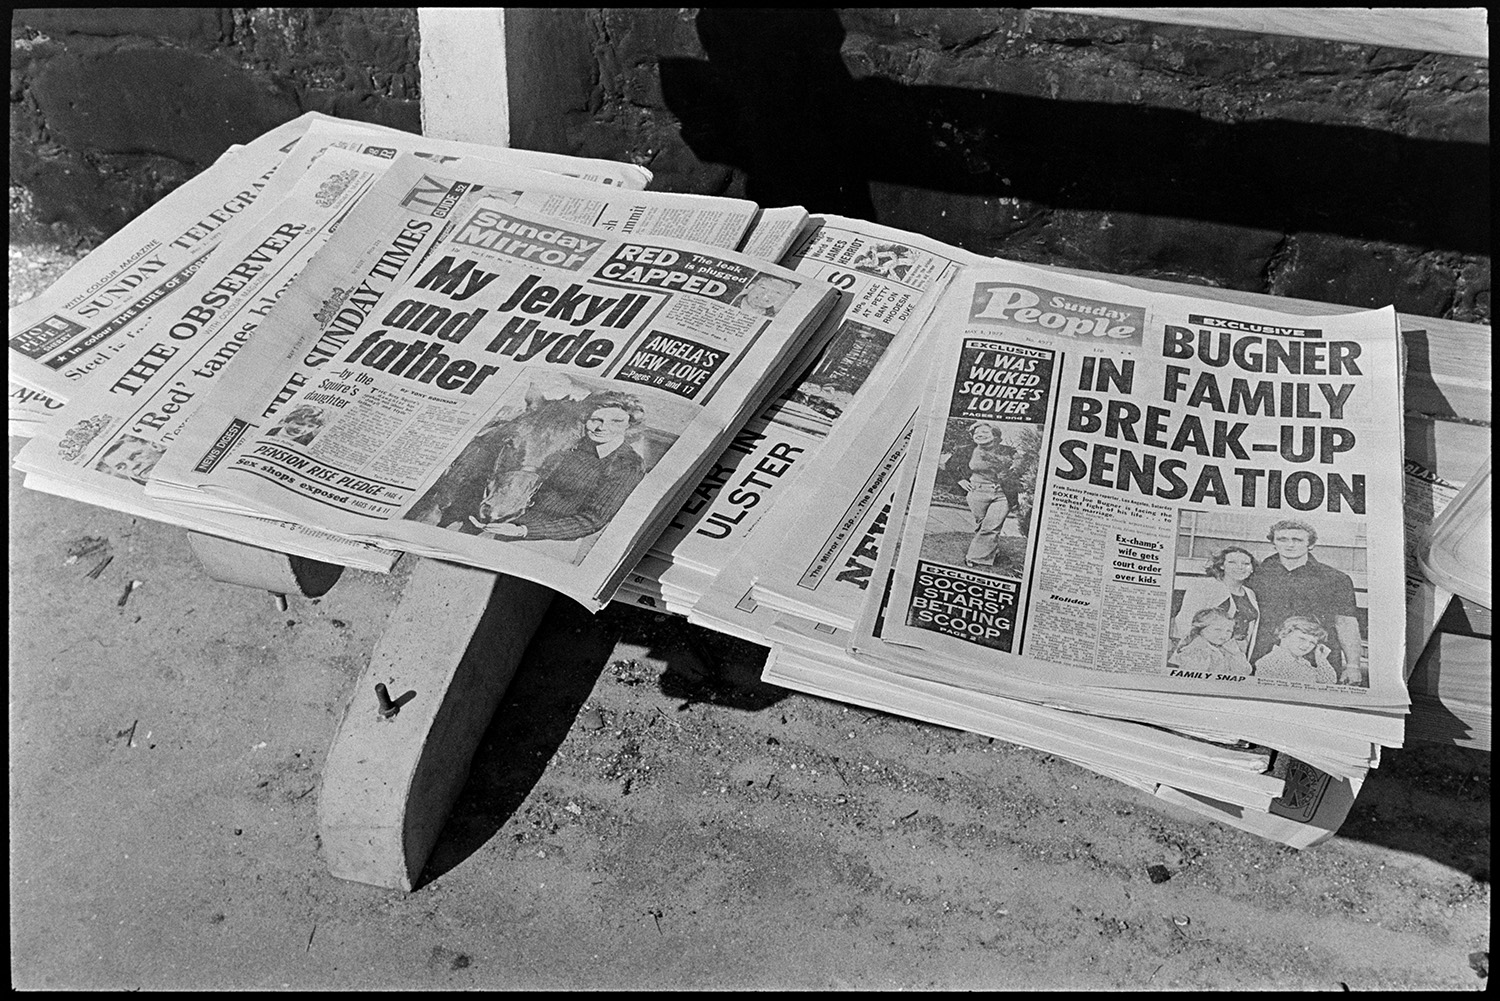 Sunday papers for sale in village, front pages! 
[A pile of Sunday newspapers for sale in Kings Nympton, Newspapers include the Sunday Telegraph, The Observer, The Sunday Times, Sunday Mirror and Sunday People. The front pages of some of the newspapers are visible.]